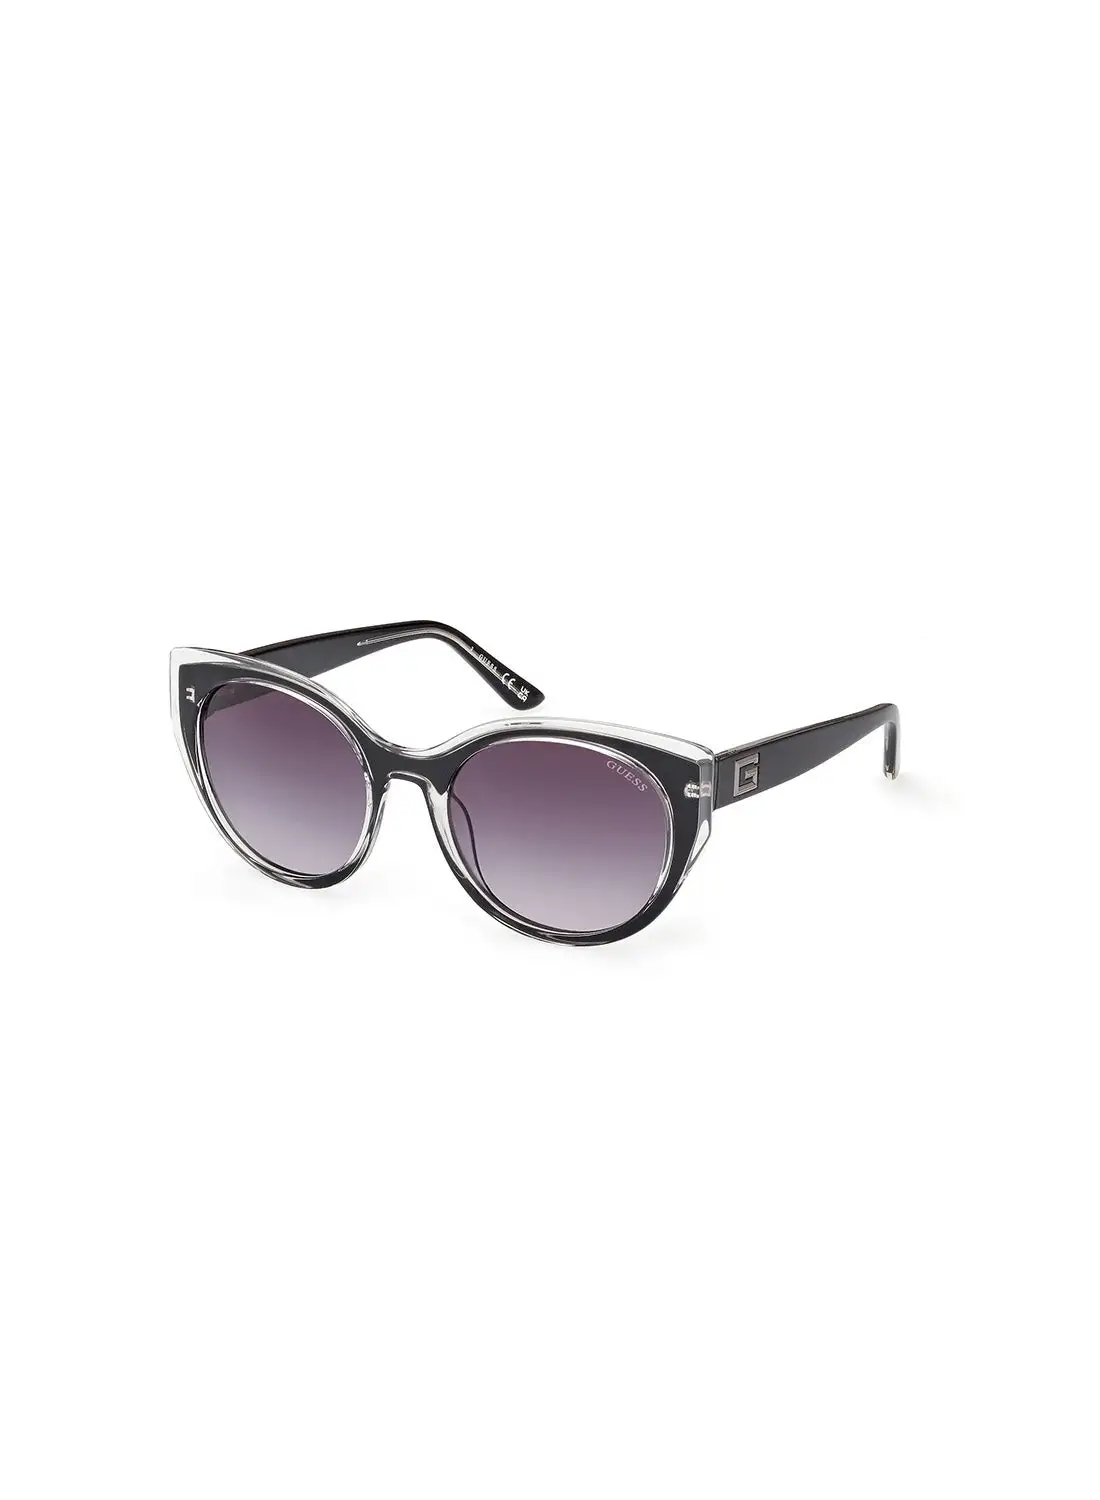 GUESS Women's UV Protection Round Sunglasses - GU790905B53 - Lens Size: 53 Mm